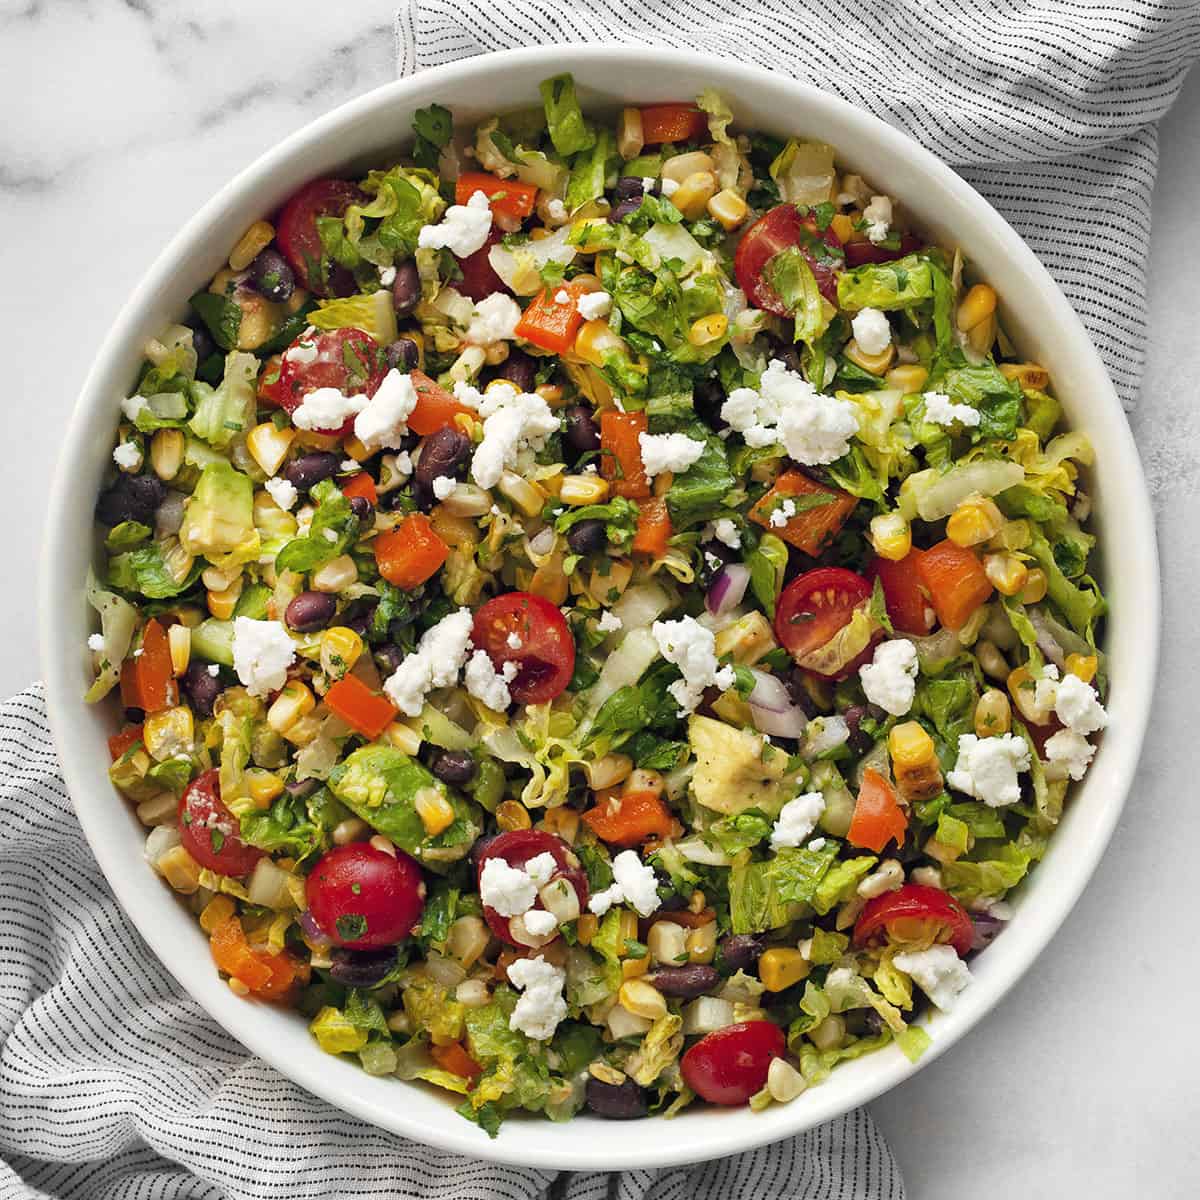 https://www.lastingredient.com/wp-content/uploads/2023/06/mexican-chopped-salad14.jpg